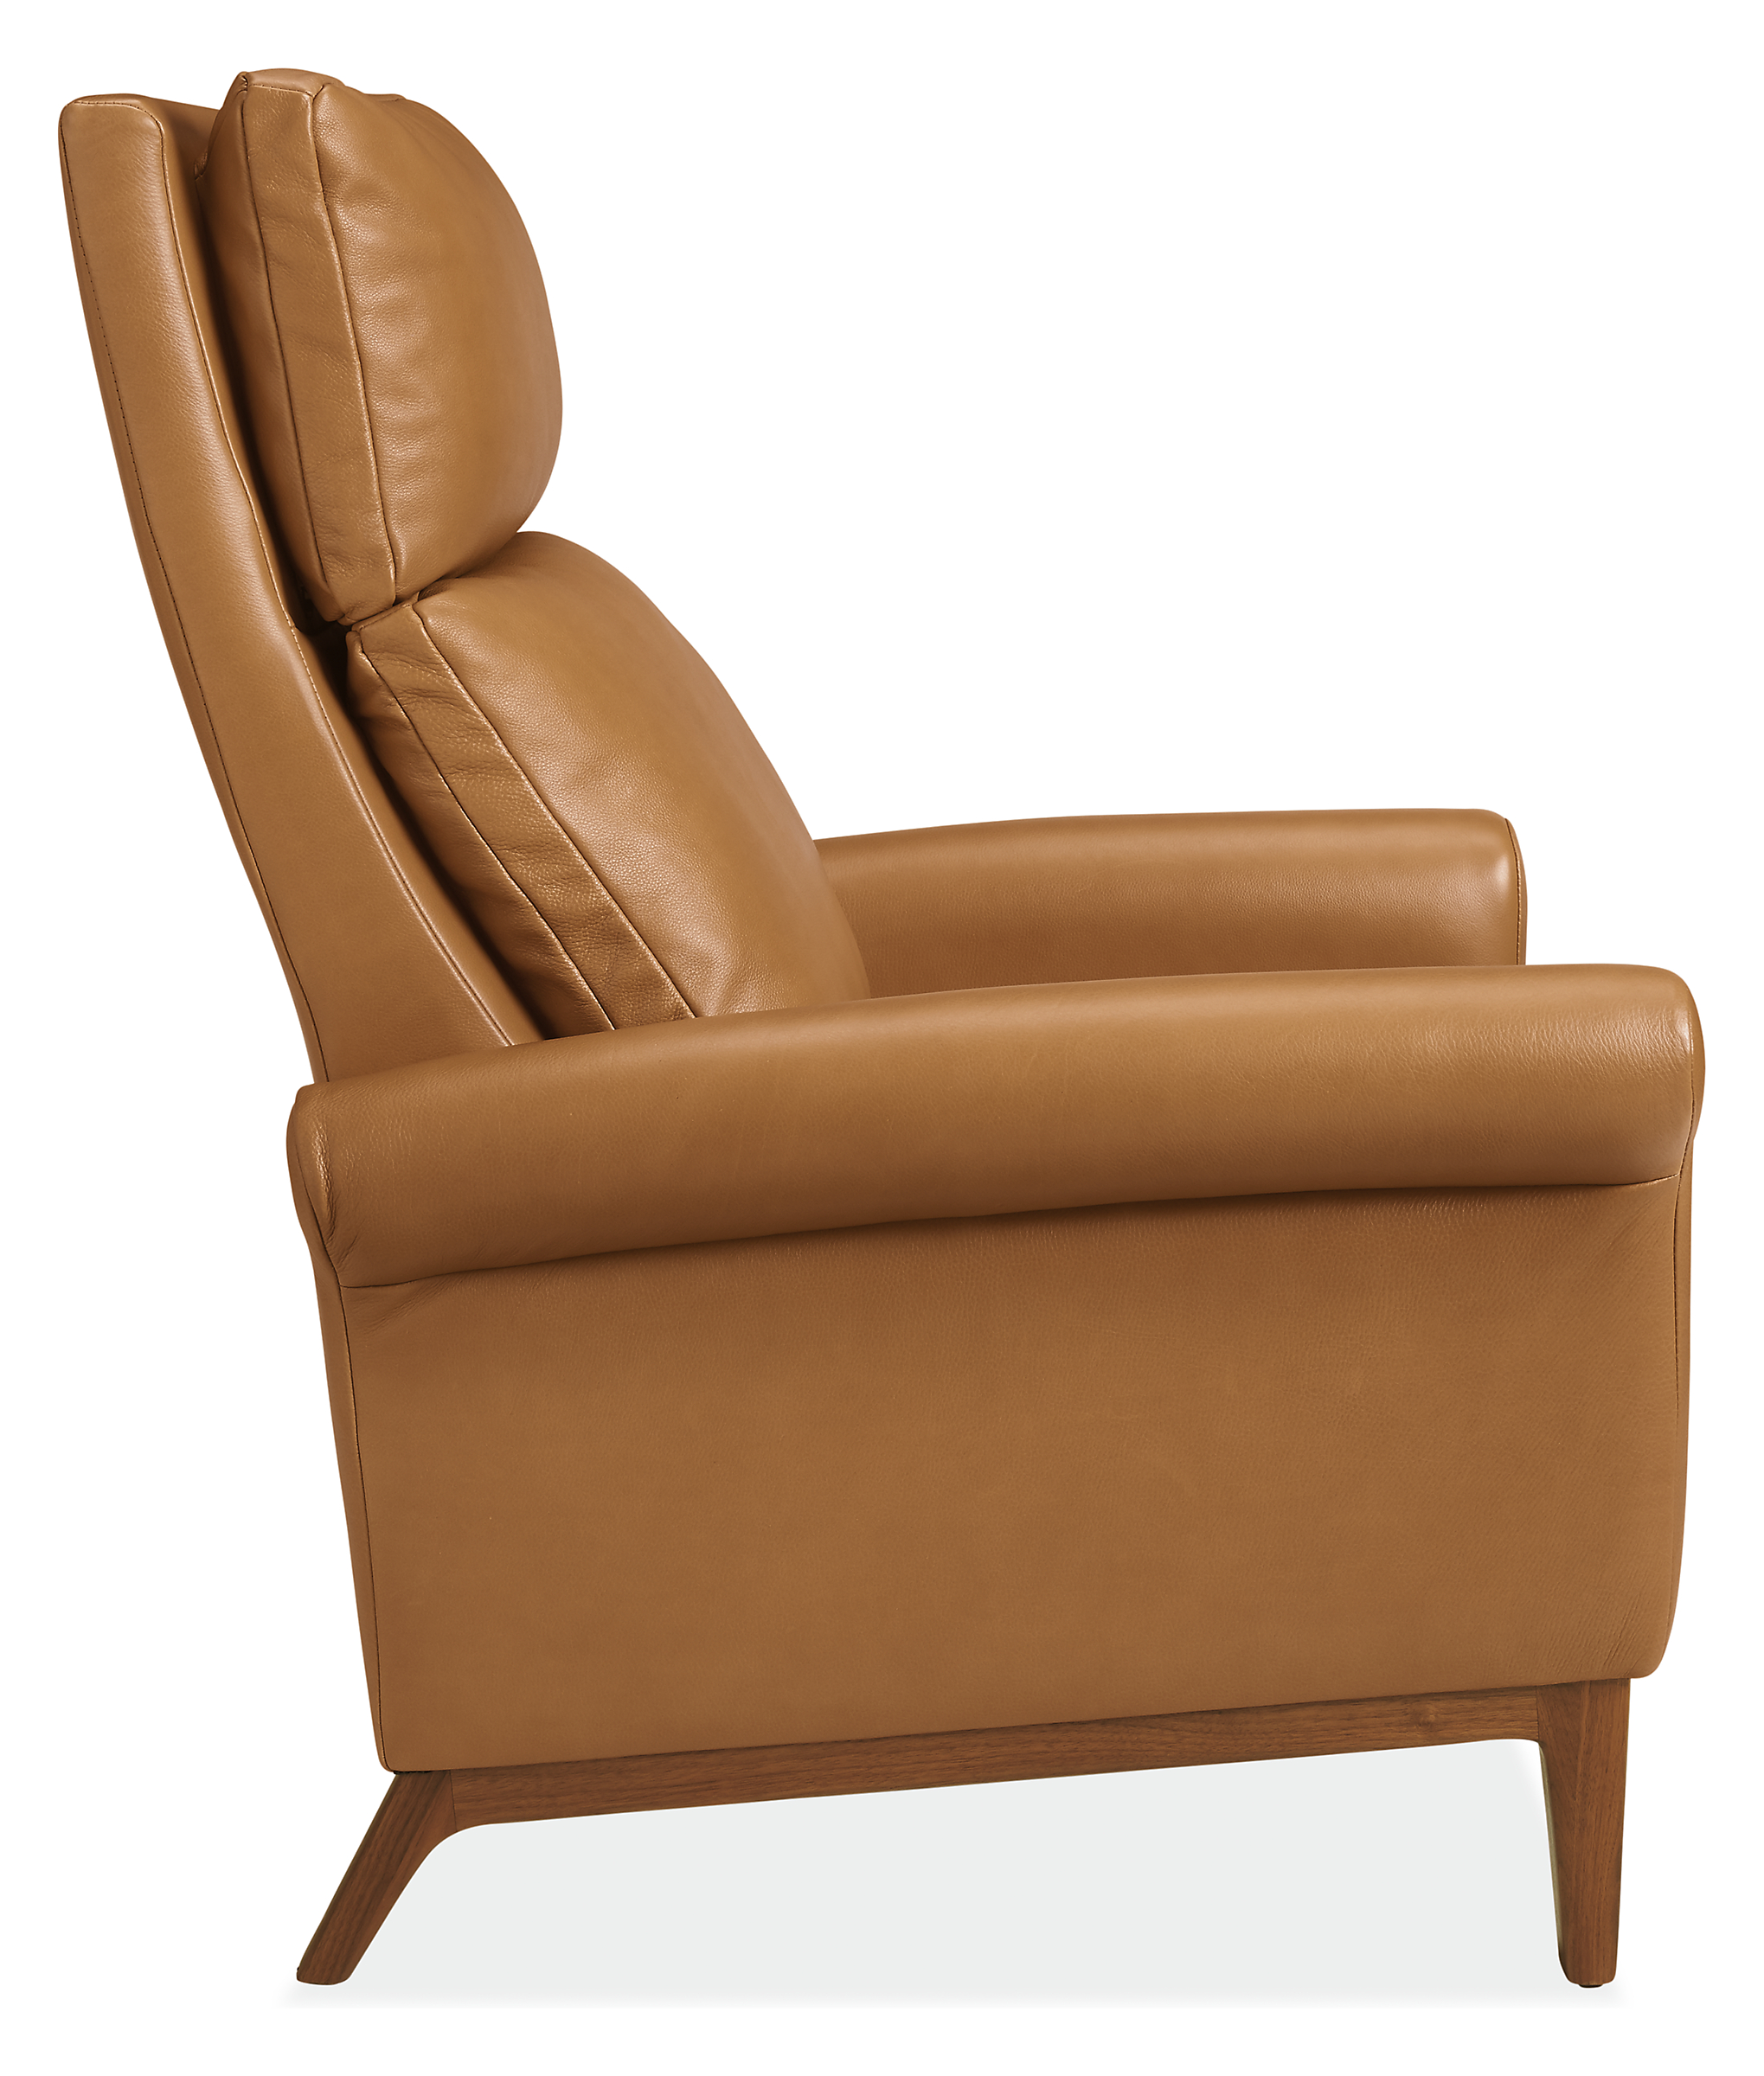 Side view of Wynton Select Recliner Wood Base in Lecco Leather- Rolled Arm.